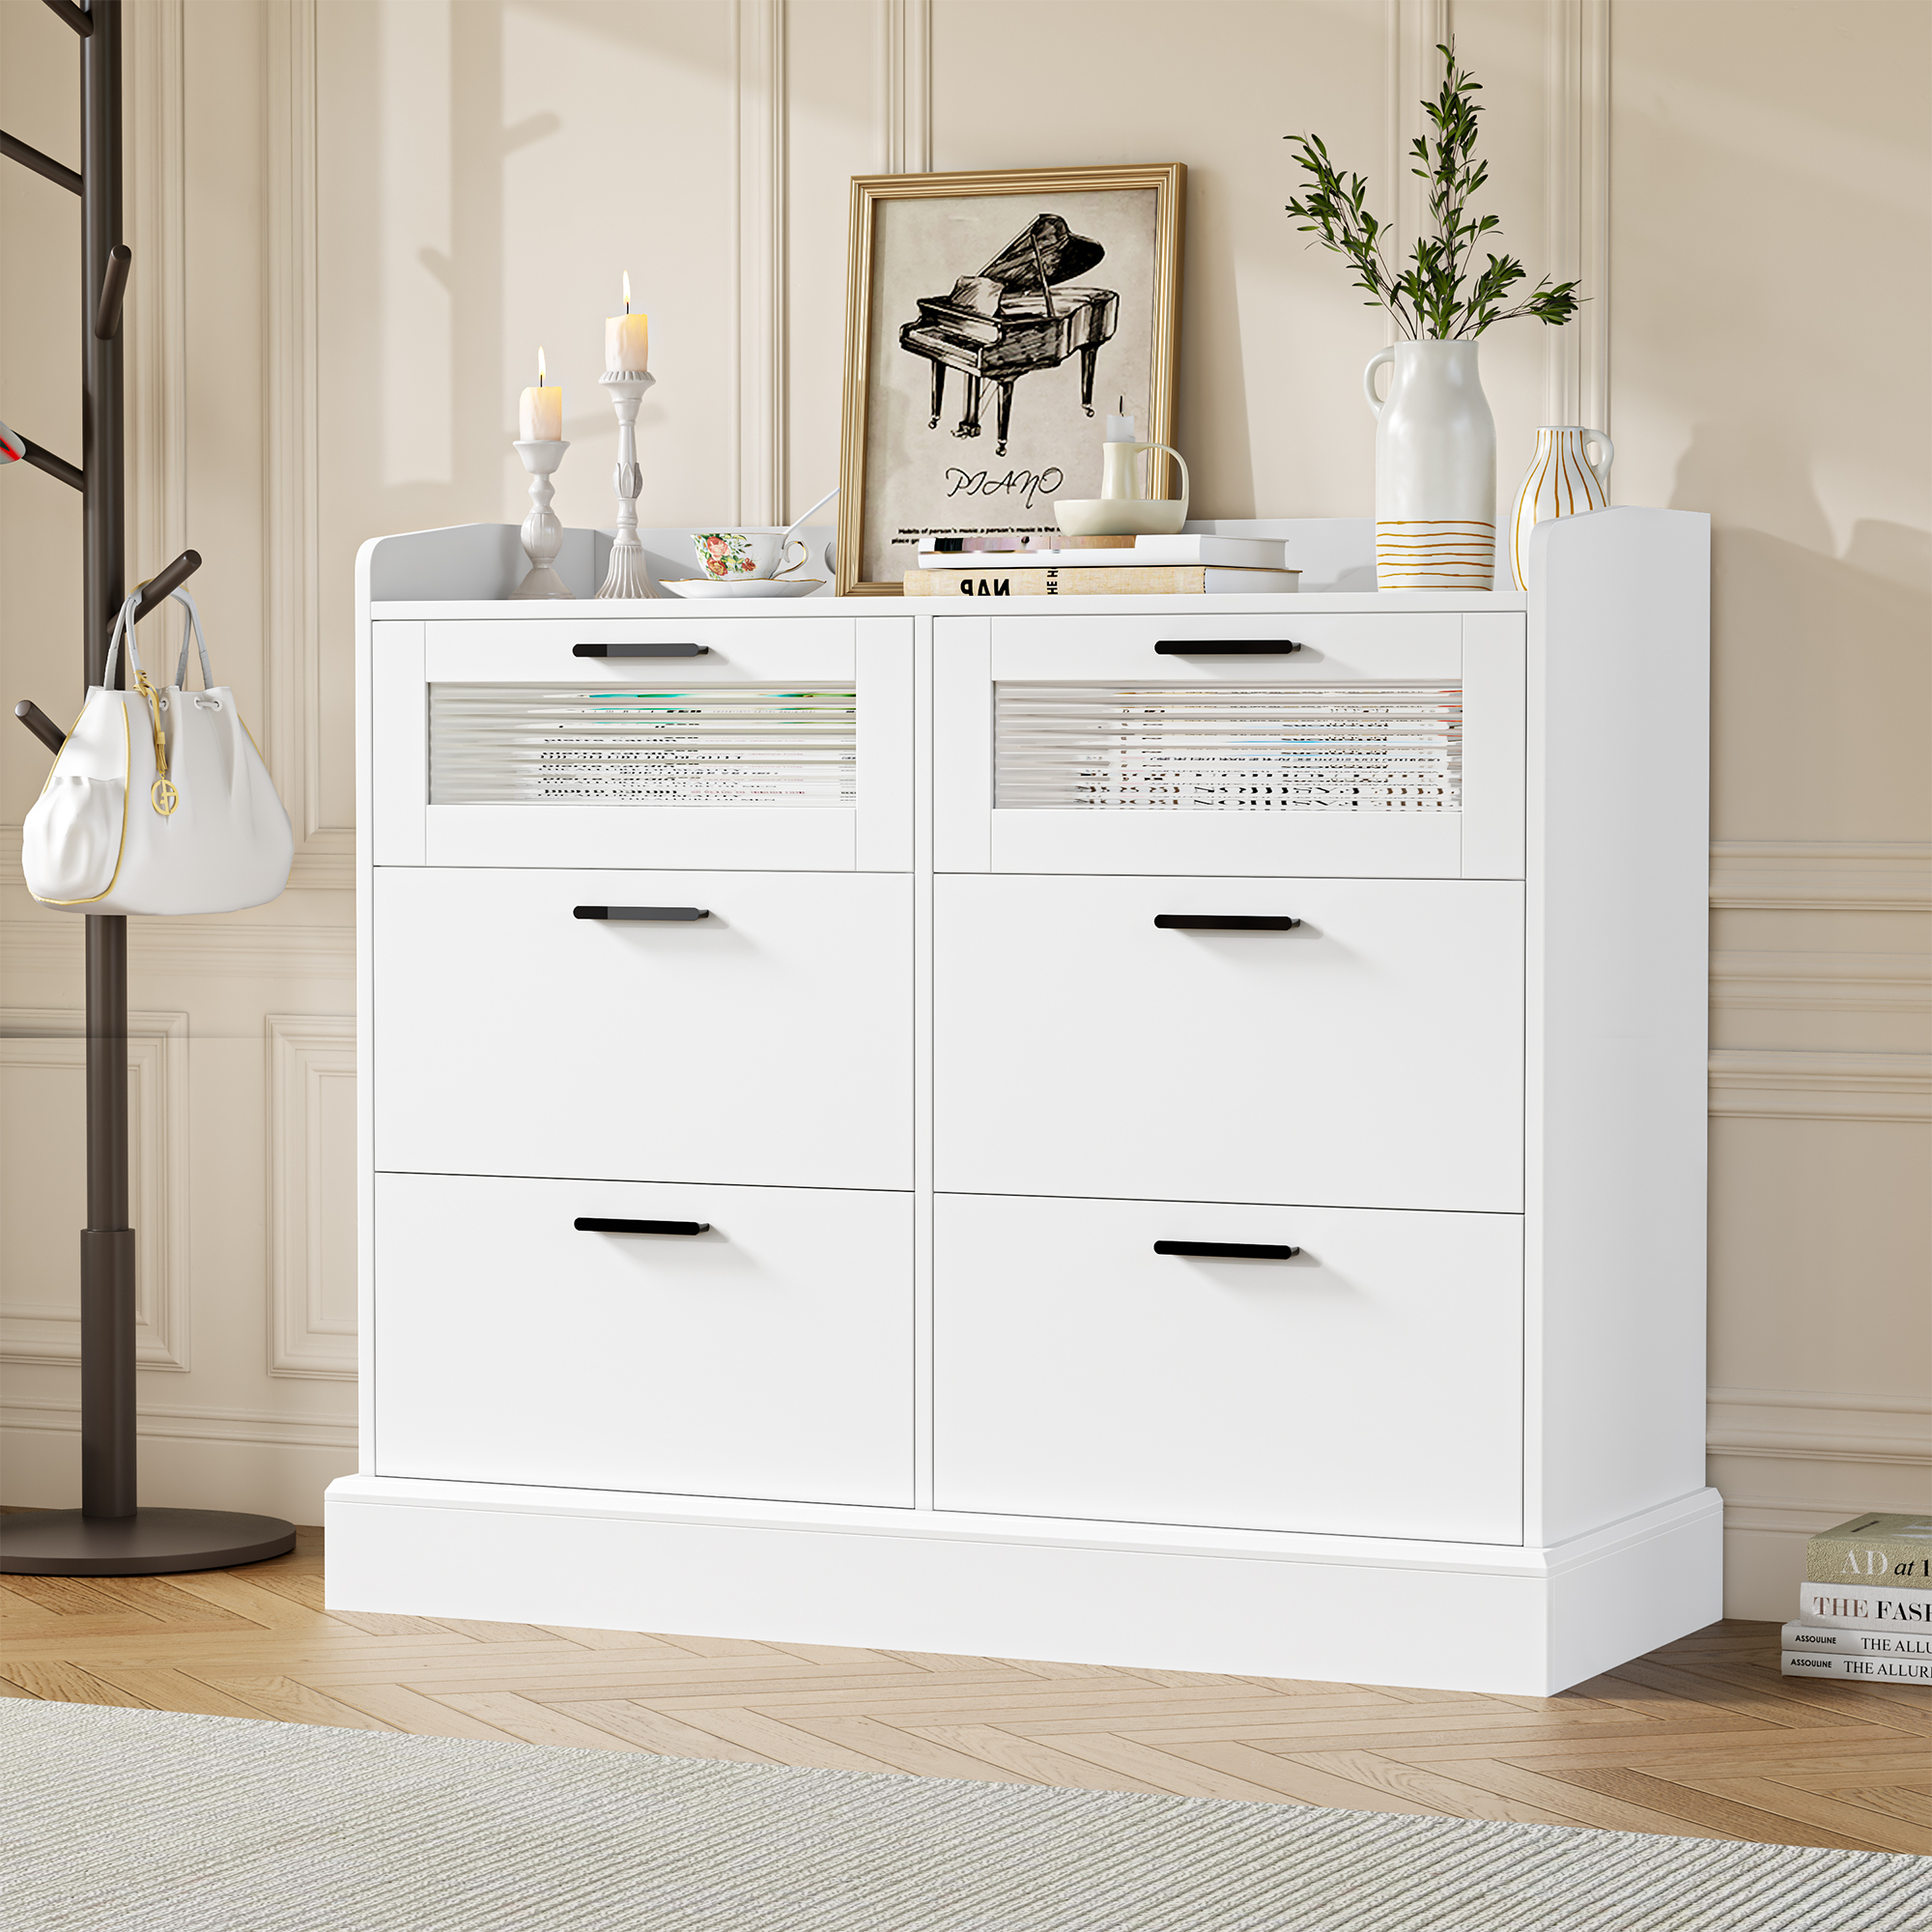 Homfa 6 Drawer Horizontal Dresser with Fence, White Chest Dresser with Glass Drawer for Bedroom - image 1 of 5